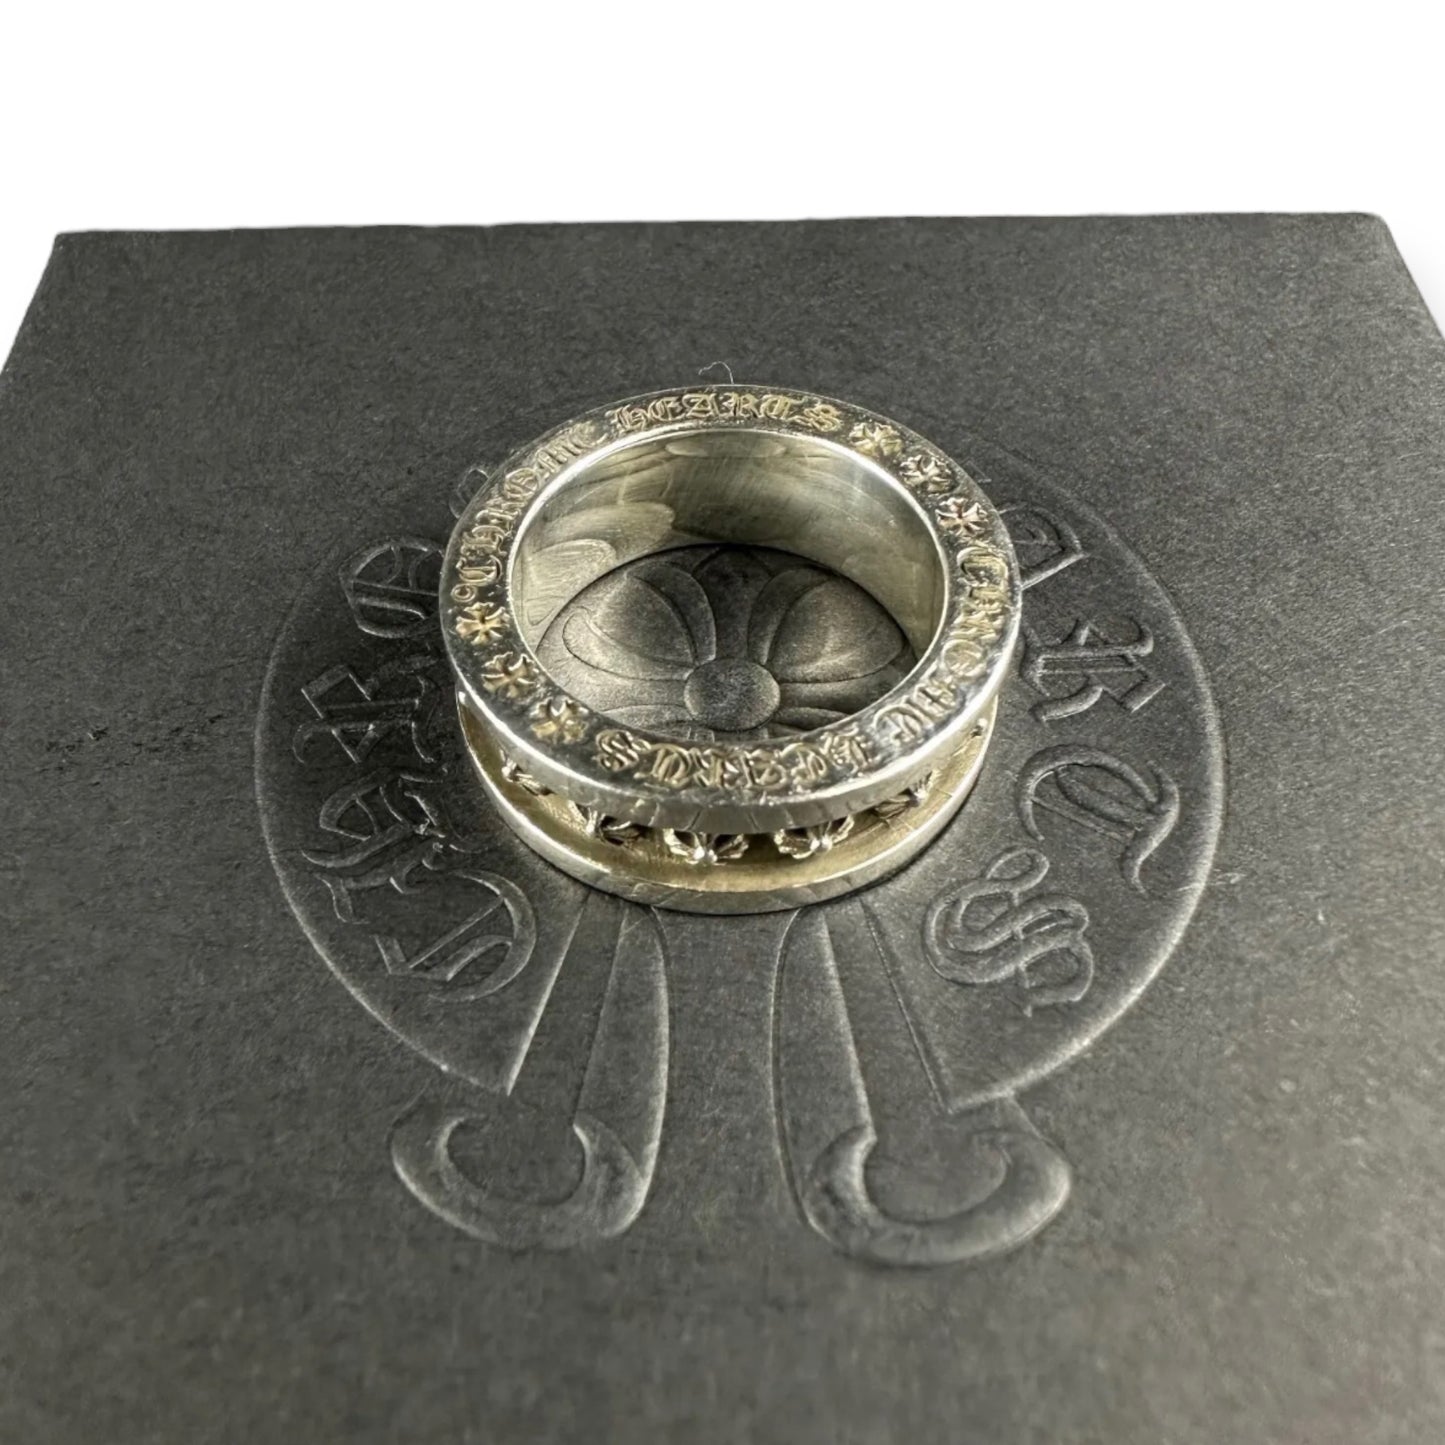 Brand New Chrome Hearts Ring Size 7